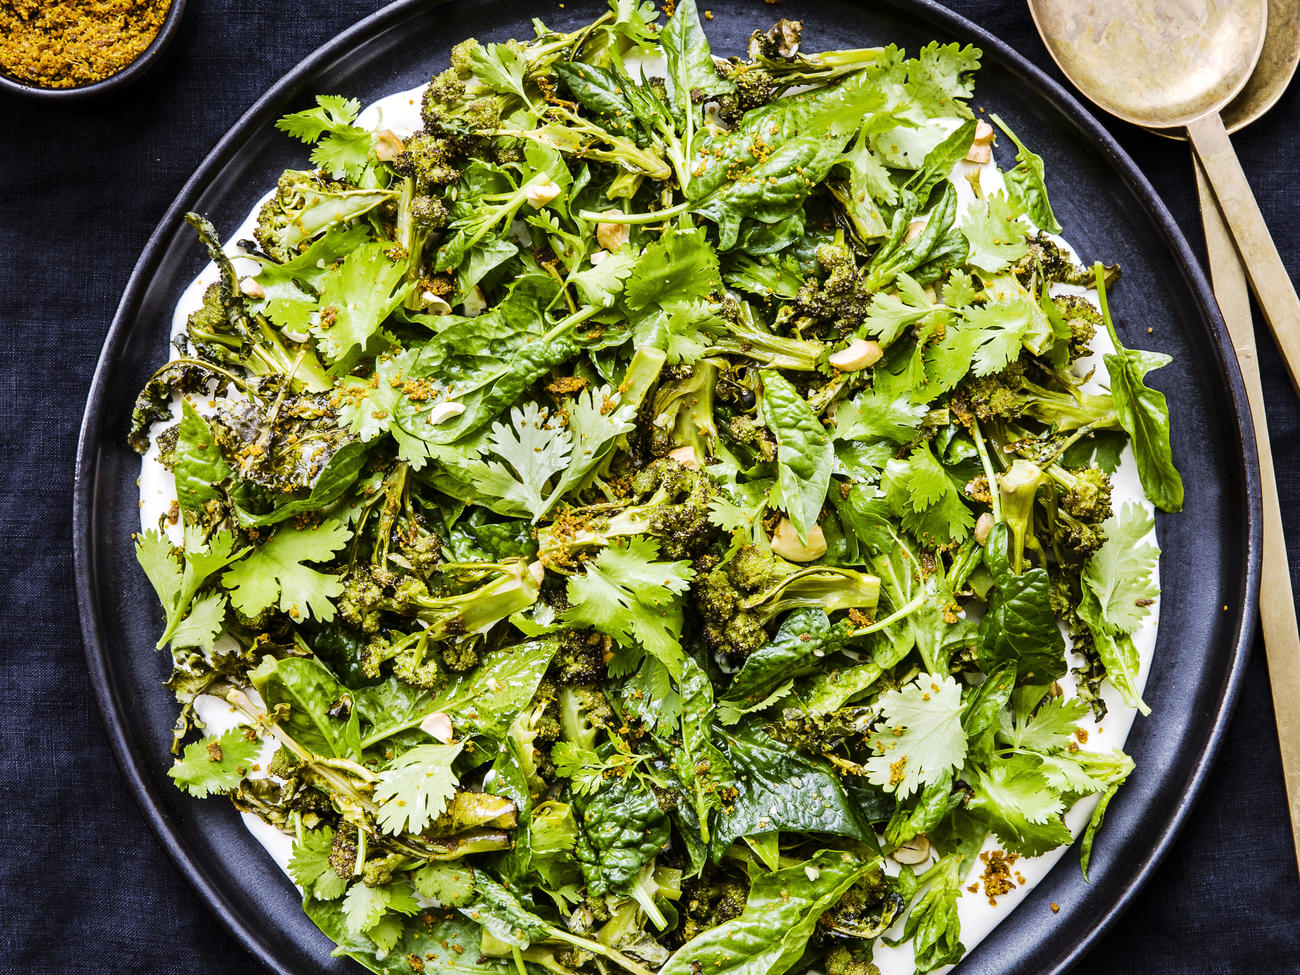 Broccoli and spinach dishes